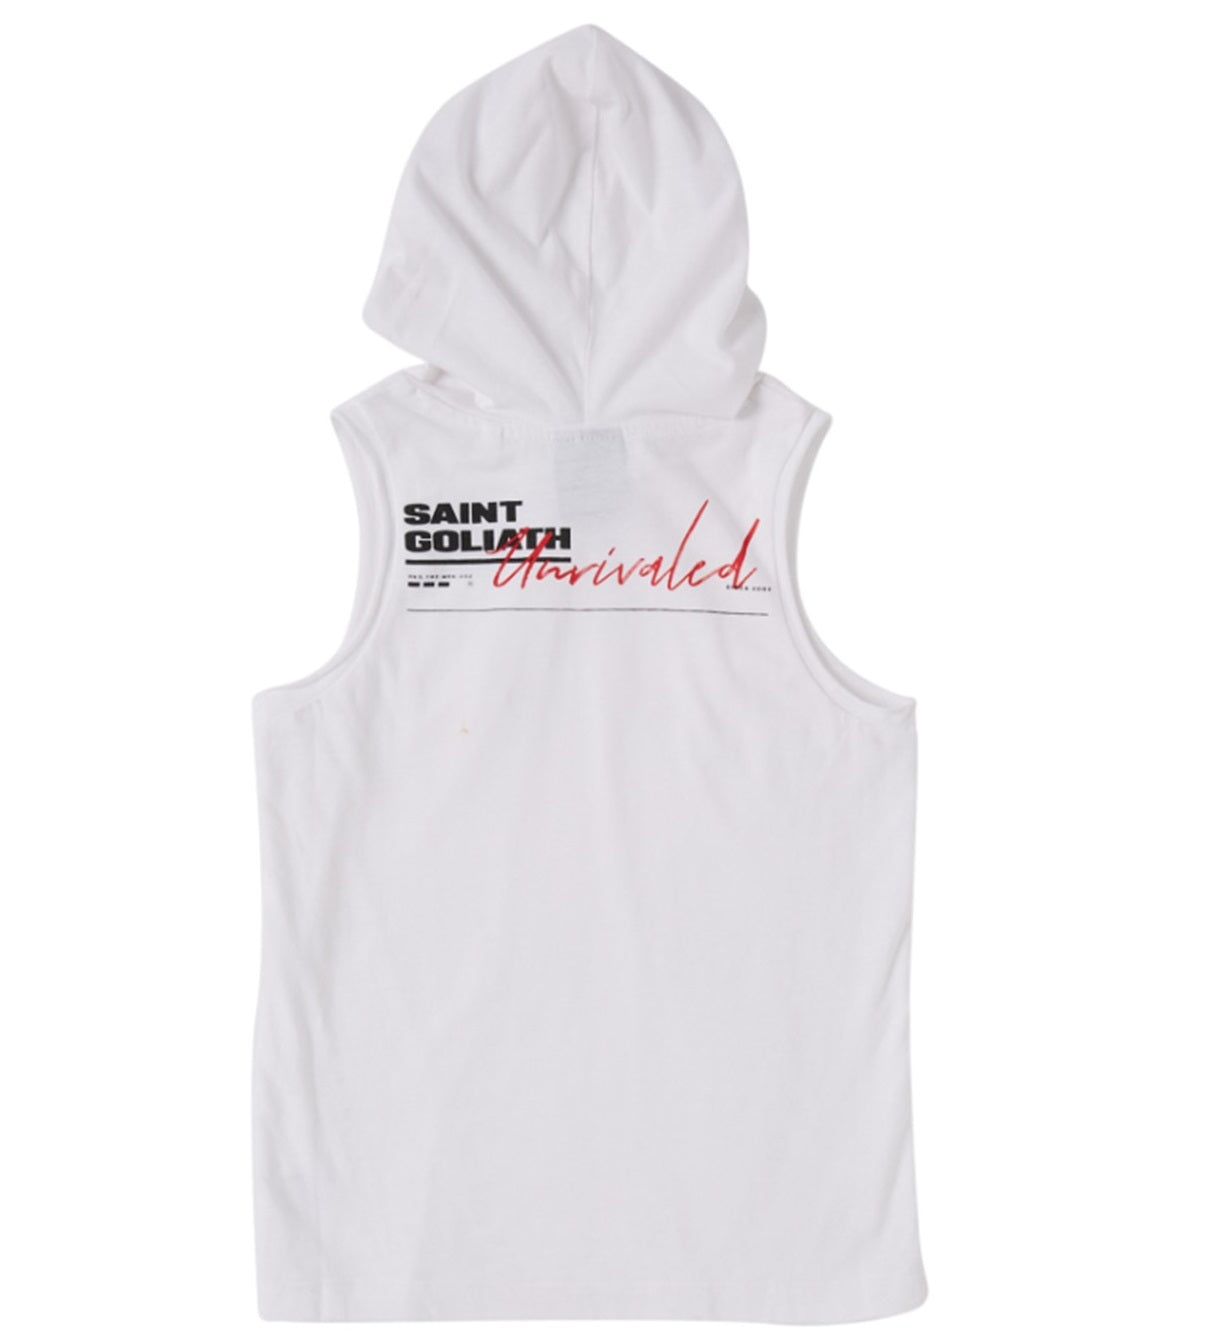 St Goliath Unrivaled Muscle Tank - White